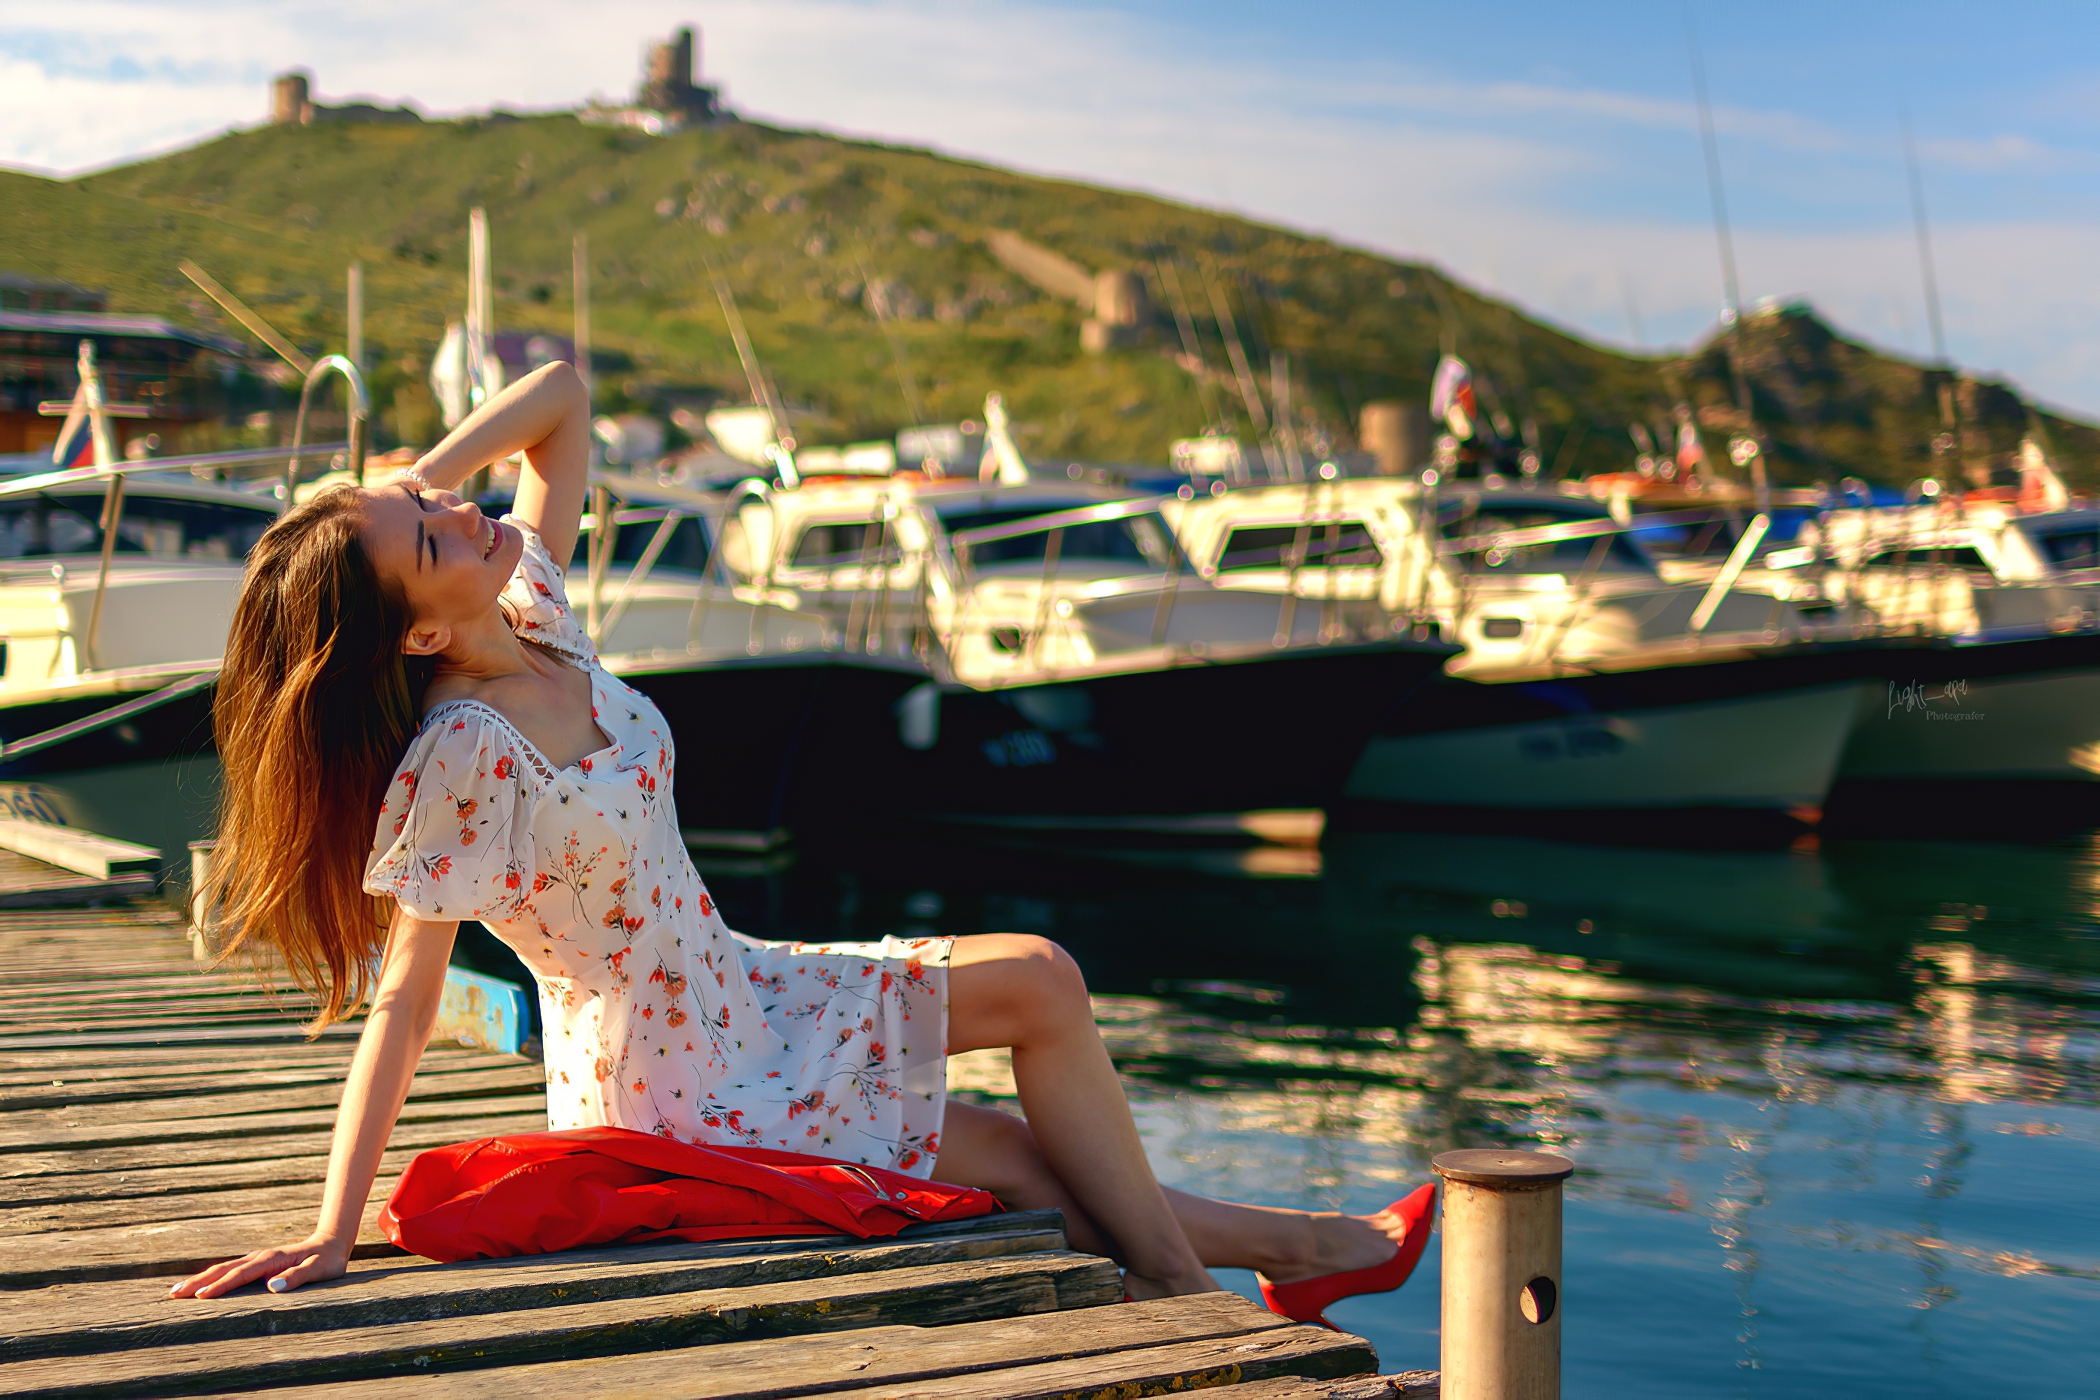 Women Model Brunette Women Outdoors Bay Dress Red Shoes Hills Sky Clouds Sitting Boat Smiling White  2100x1400